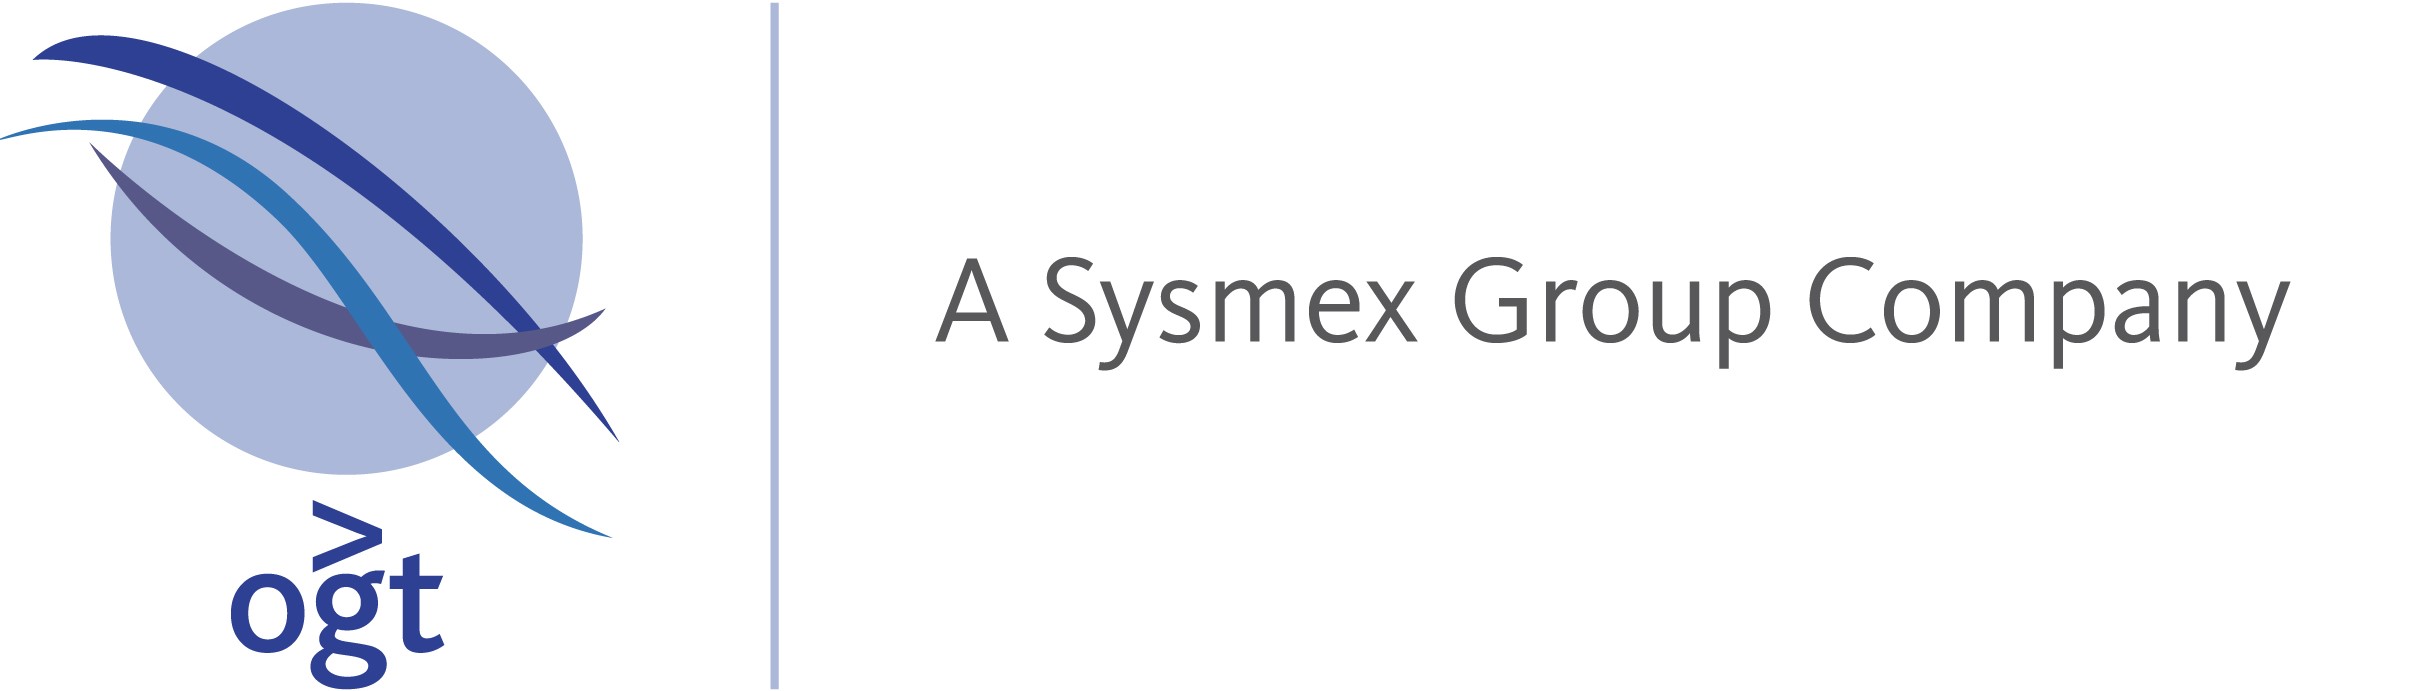 OGT & Sysmex Logo Horizontal Isolation Guide 2018